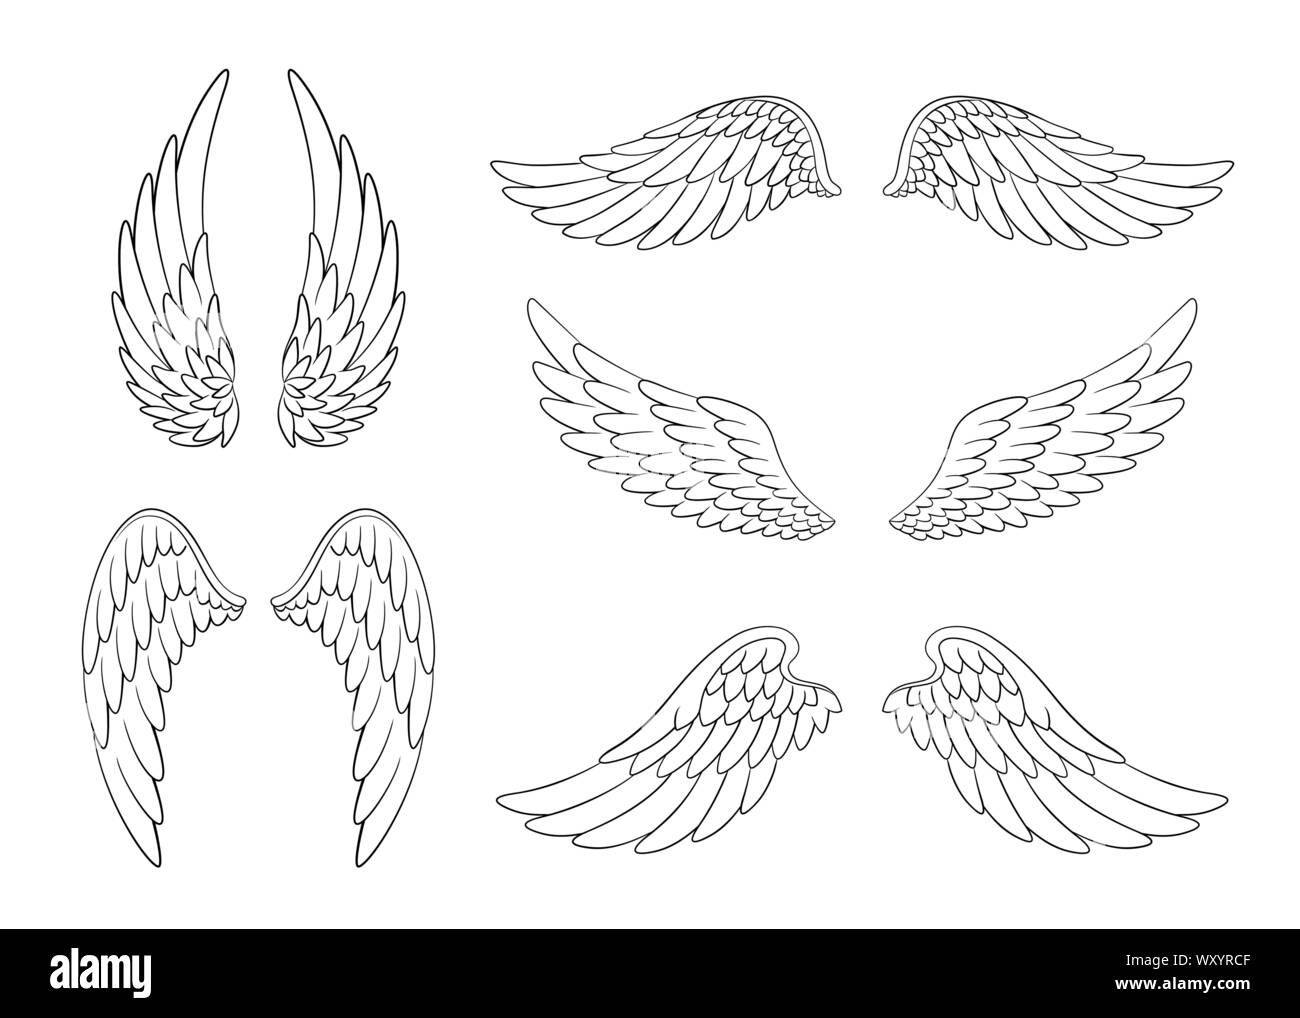 Set of hand drawn bird or angel wings of different shape in open position. Contoured doodle wings set isolated on white background. Stock Vector